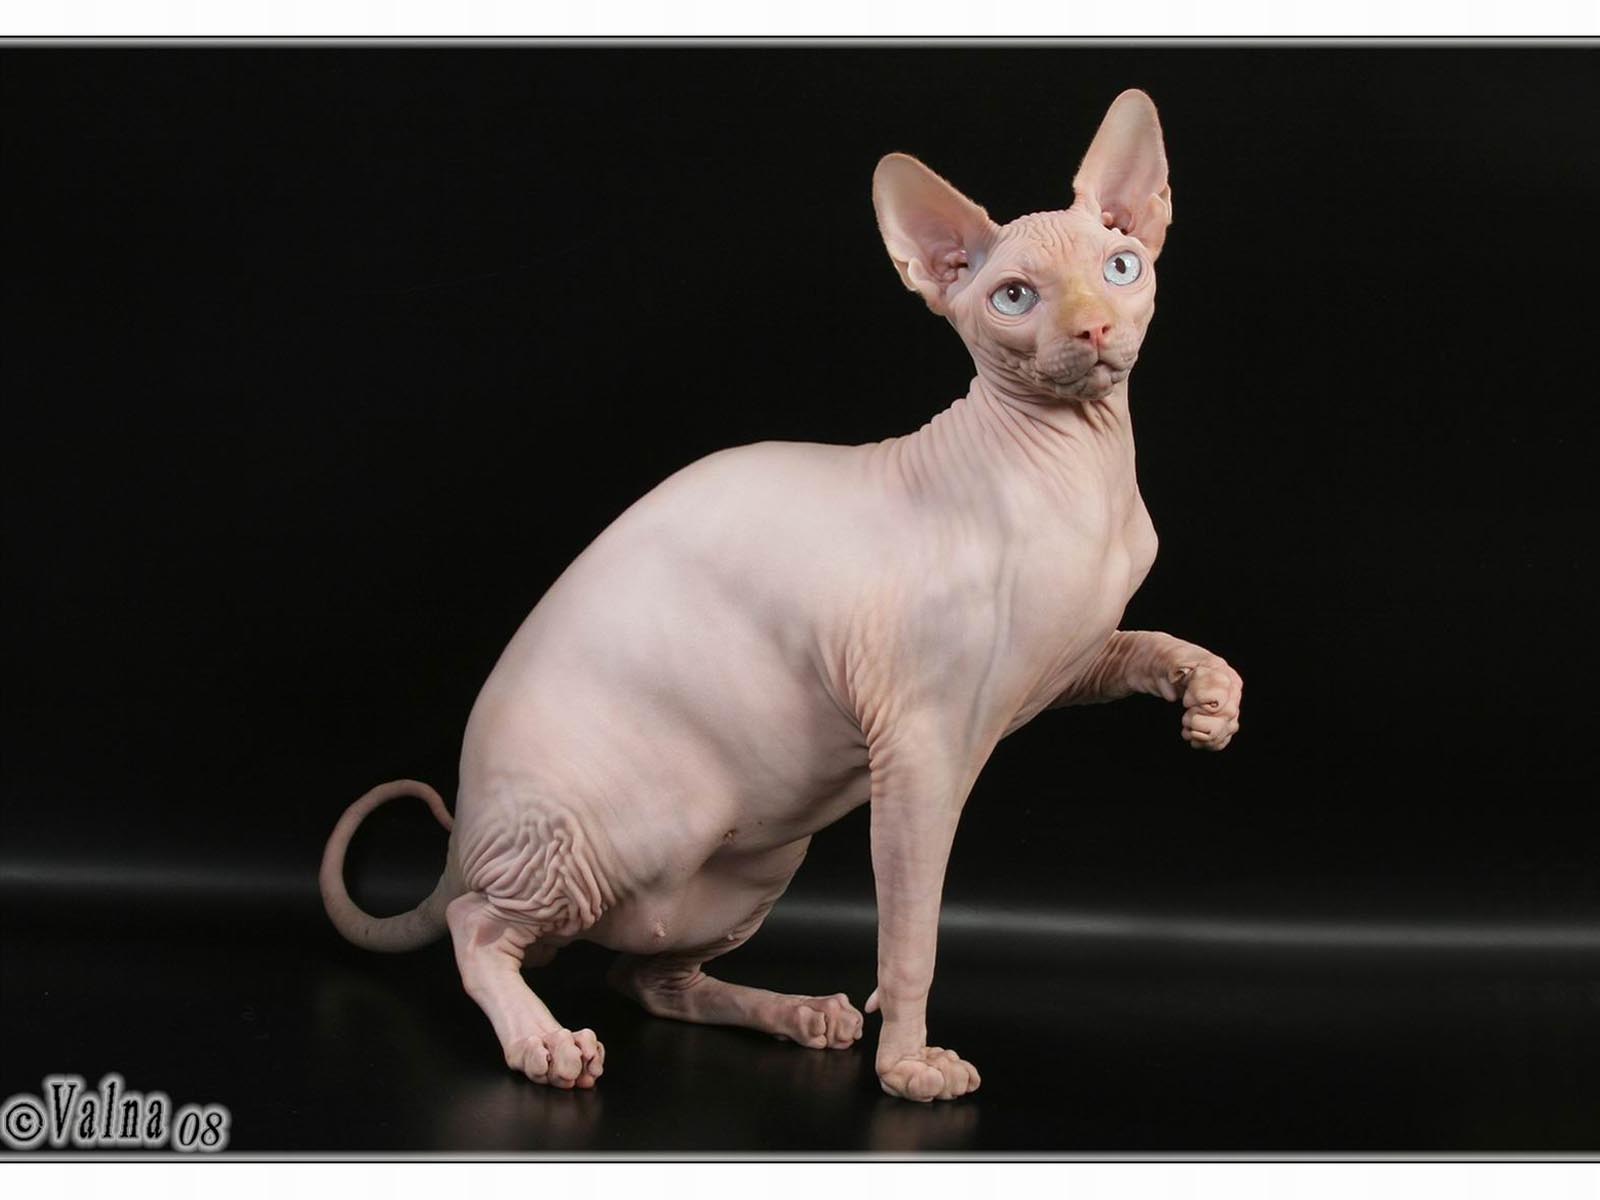 Sphynx Cat Wallpaper Cat and Doggy Funny Cat Wallpaper